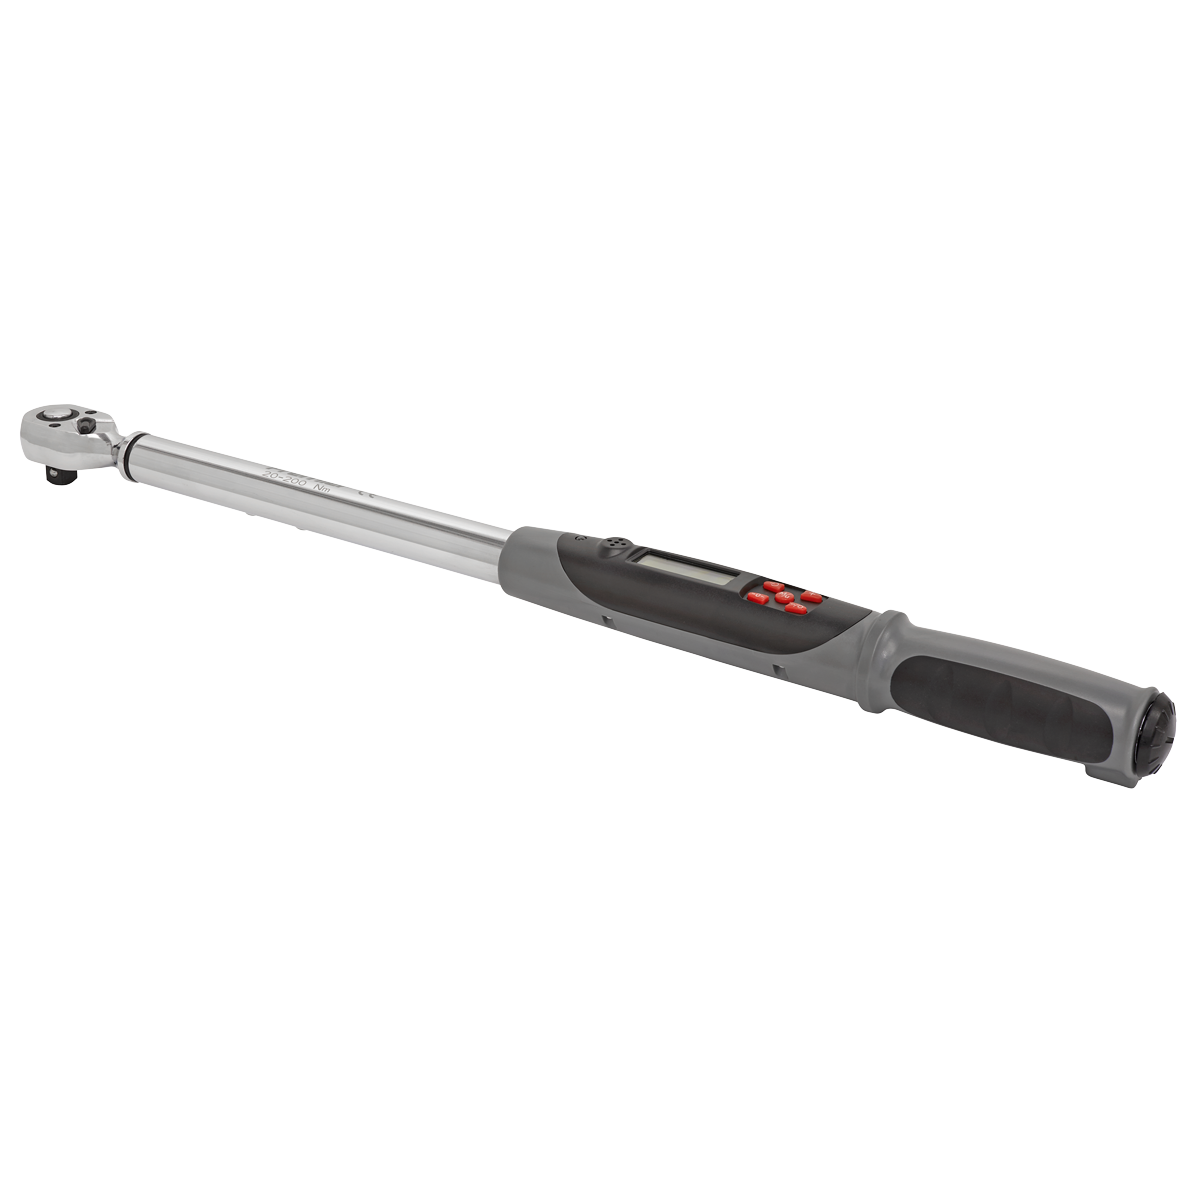 Sealey Angle Torque Wrench Digital 1/2"Sq Drive 20-200Nm(14.7-147.5lb.ft)